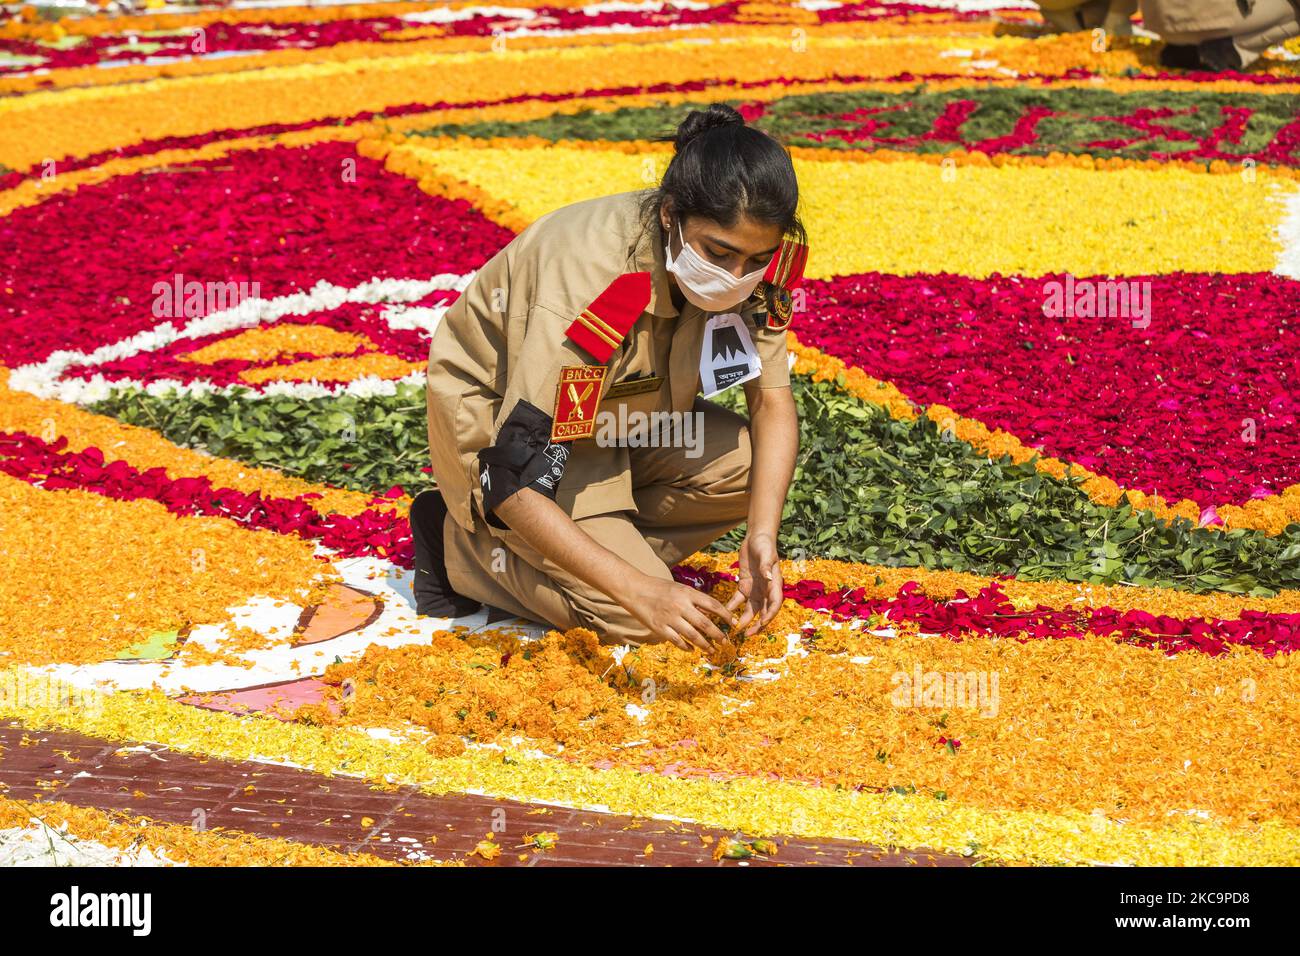 Youth decorate with flowers the Bangladesh Central Language Martyrs' Memorial monument in homage to the martyrs of the 1952 Bengali language movement during the International Mother Language Day, in Dhaka on February 21, 2021. This event is dedicated to the martyrs who died on 21 February 1952 in a demonstration calling for the establishment of Bengali as one of the state languages of former East Pakistan. (Photo by Ahmed Salahuddin/NurPhoto) Stock Photo